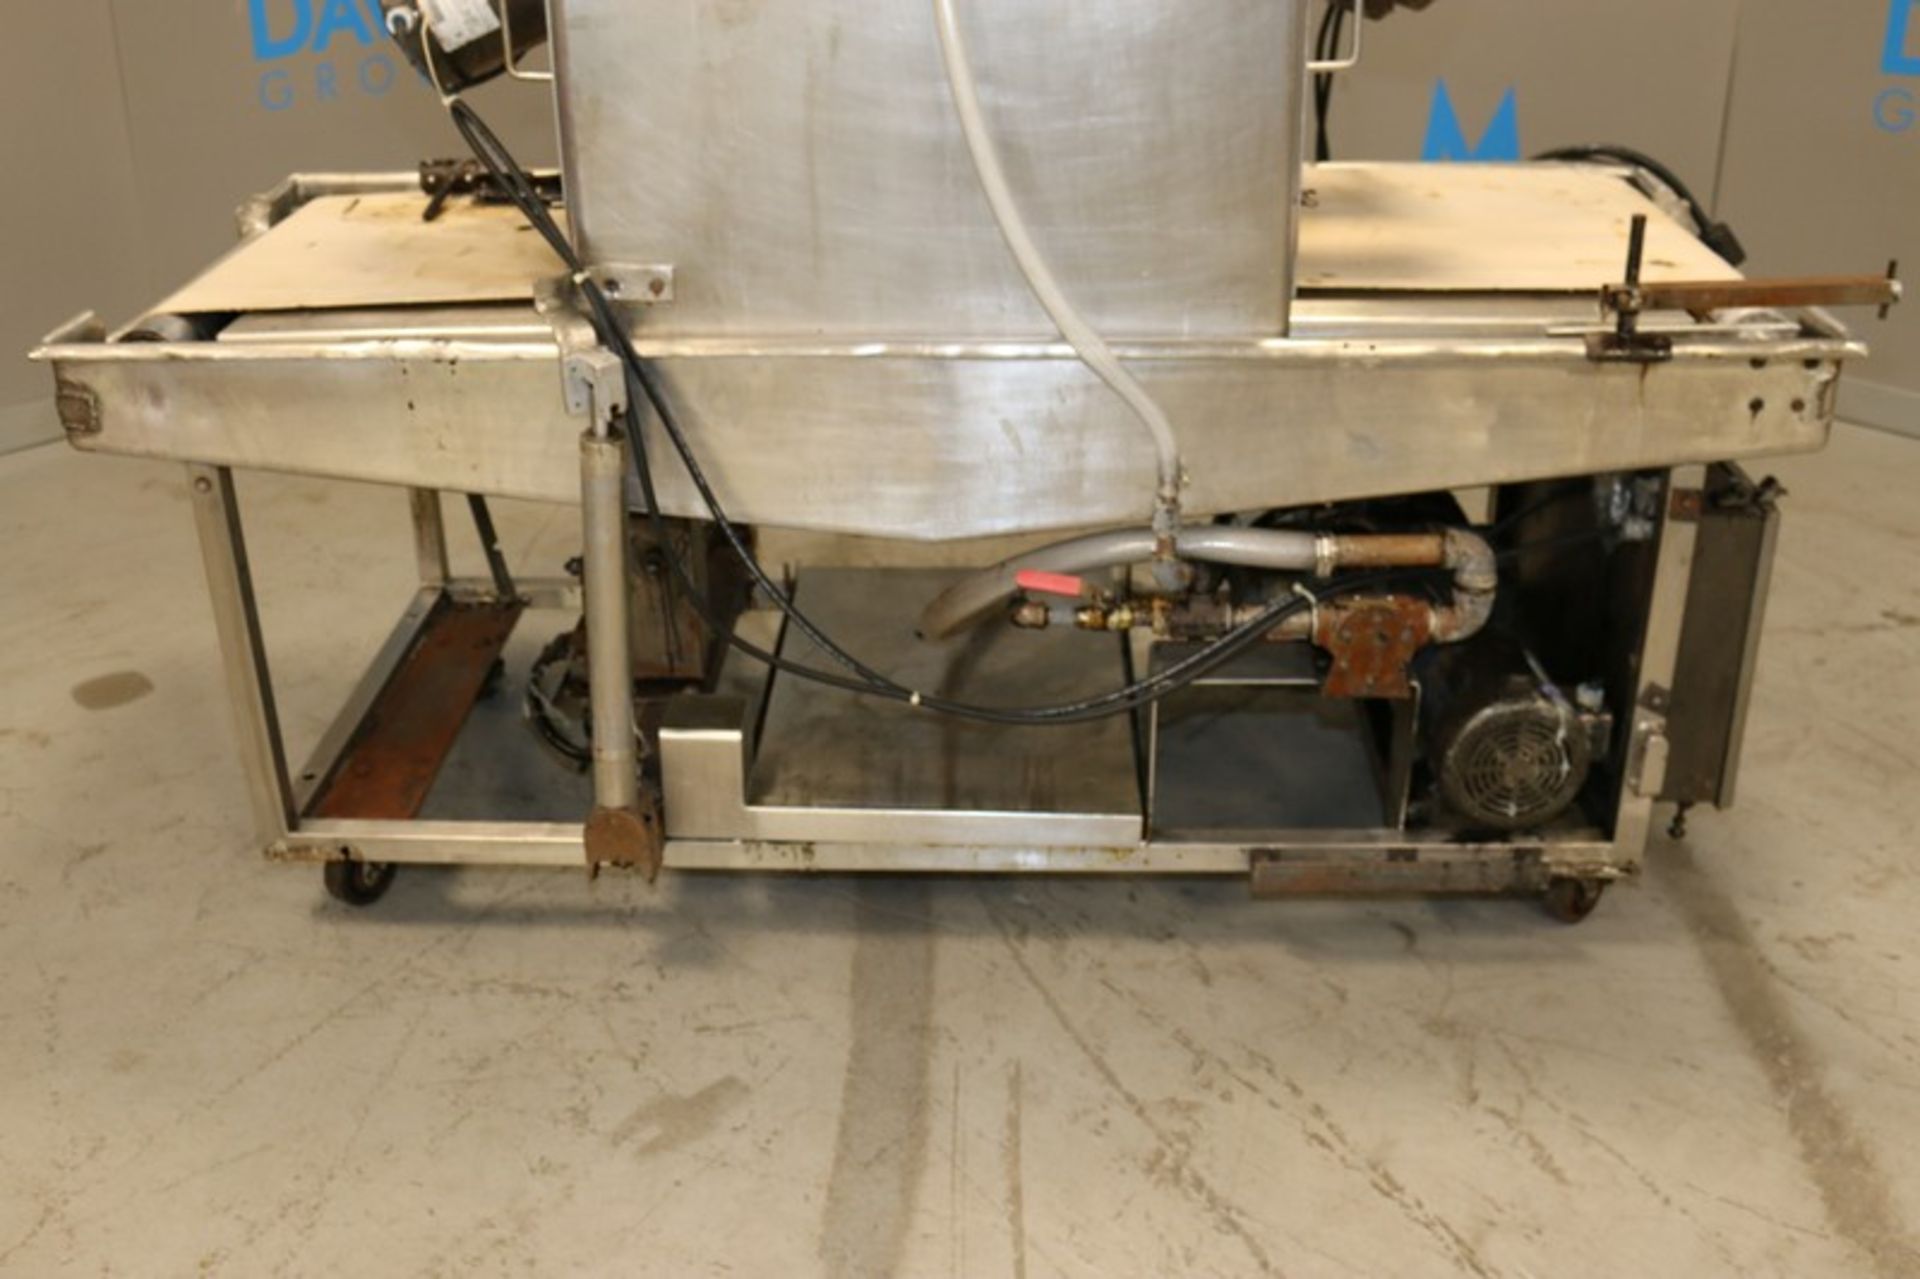 Bauer Machine Co. S/S Pan Greaser, with Aprox. 22-3/4" W Infeed/Outfeed Belt, with Drives & Hoses, - Image 9 of 10